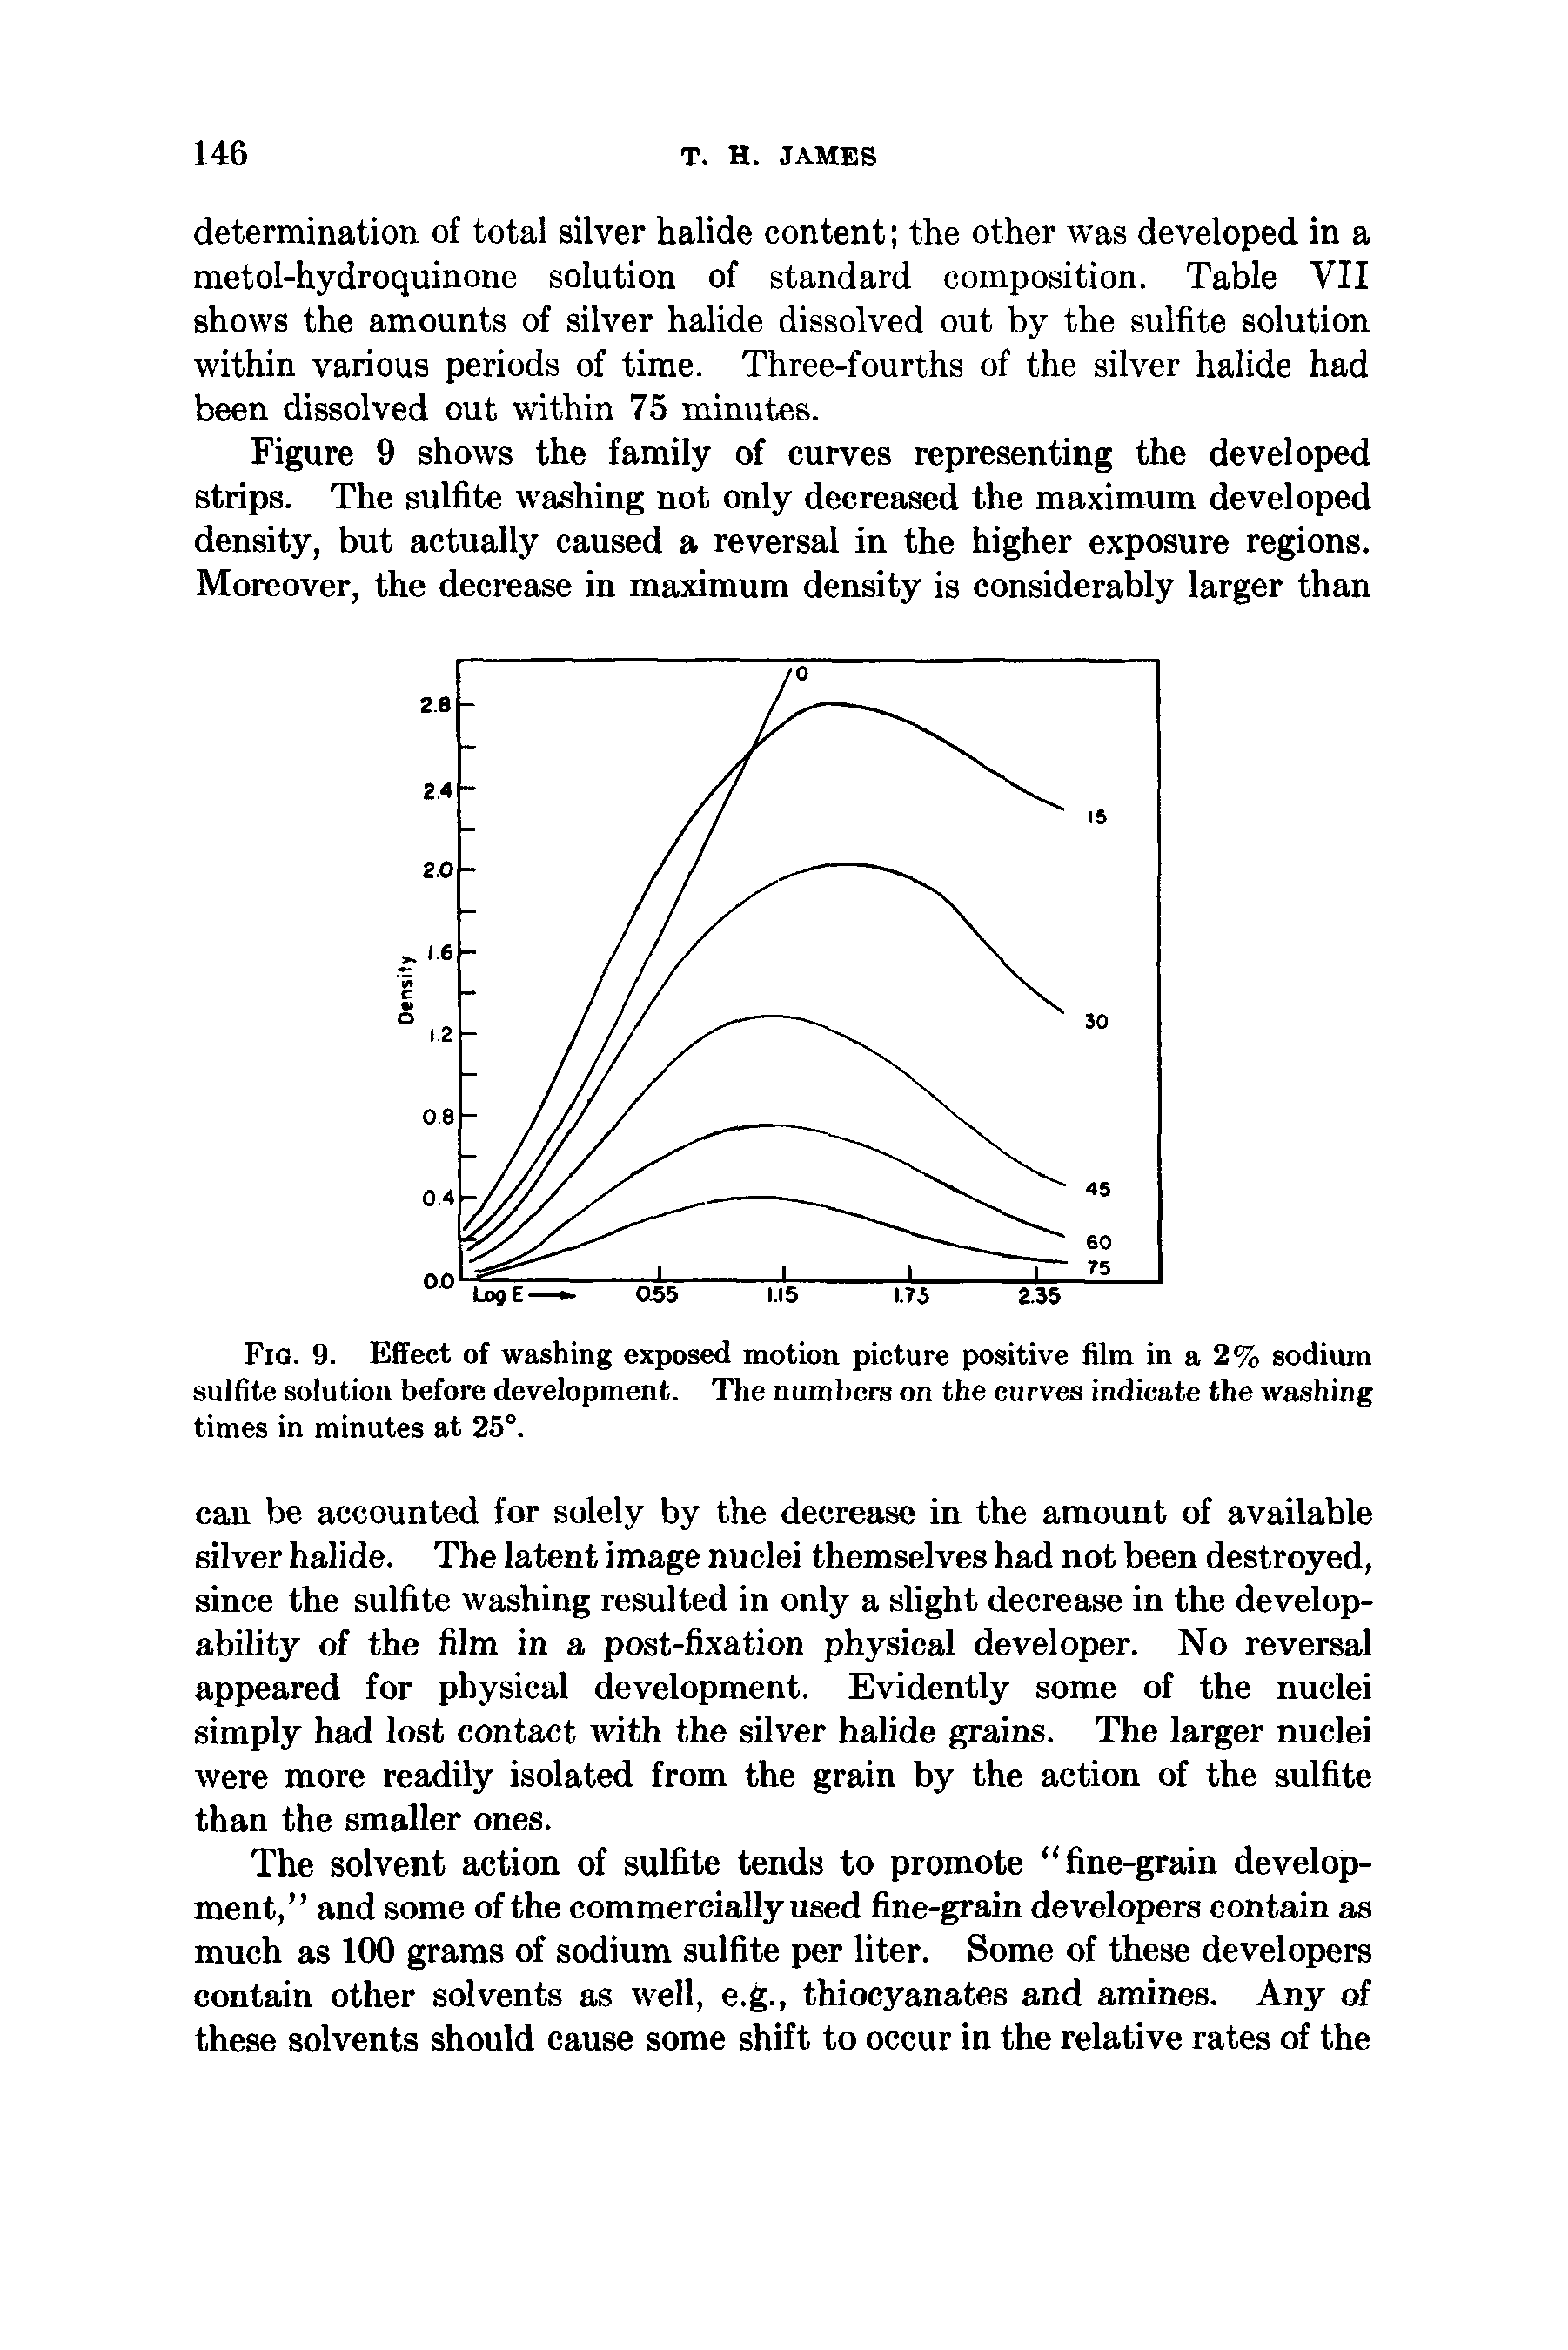 Fig. 9. Effect of washing exposed motion picture positive film in a 2% sodium sulfite solution before development. The numbers on the curves indicate the washing times in minutes at 25°.